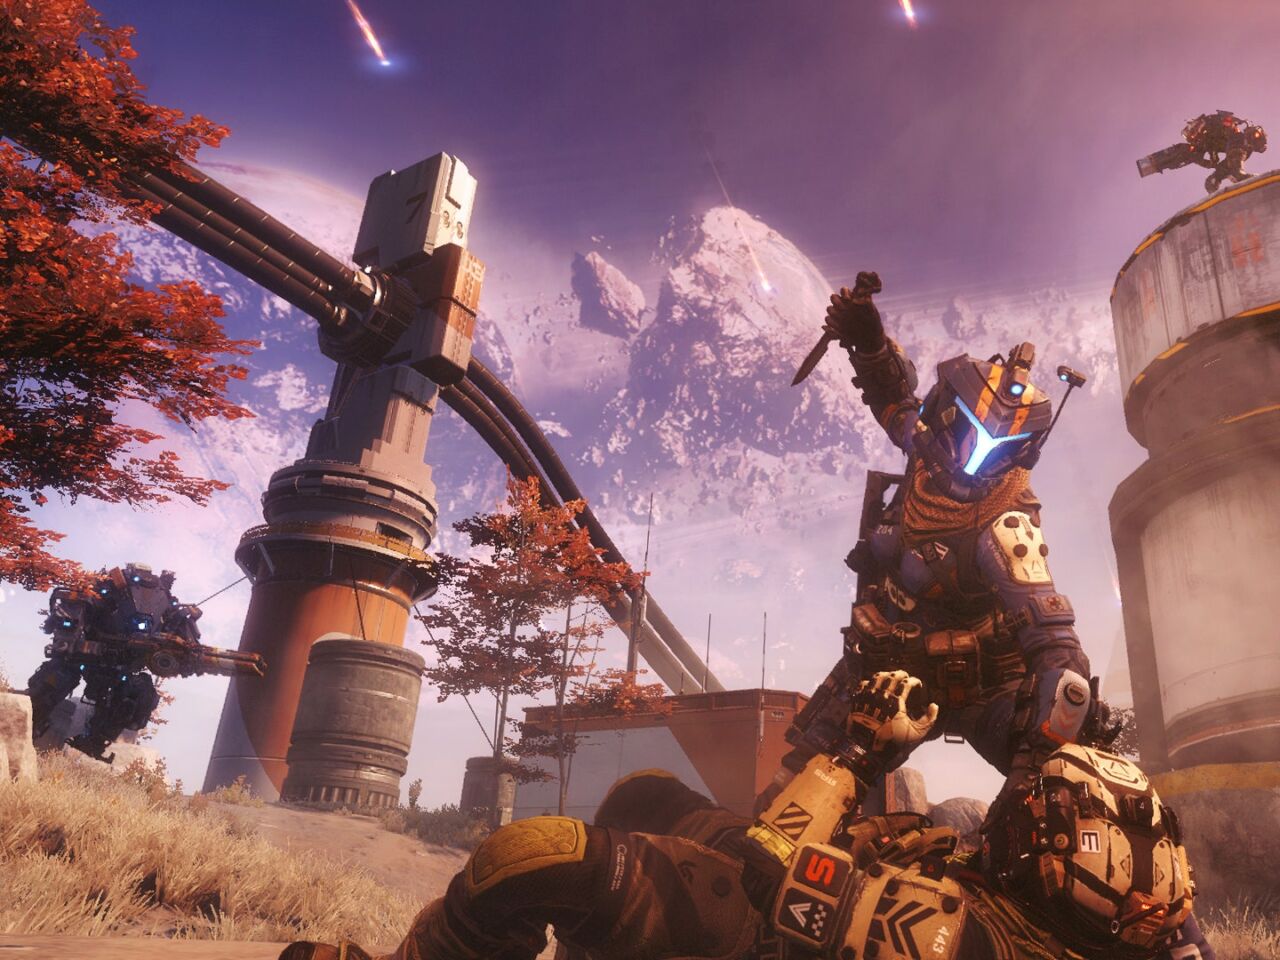 Titanfall 2 Returns And Breaks The Peak Records On Steam!